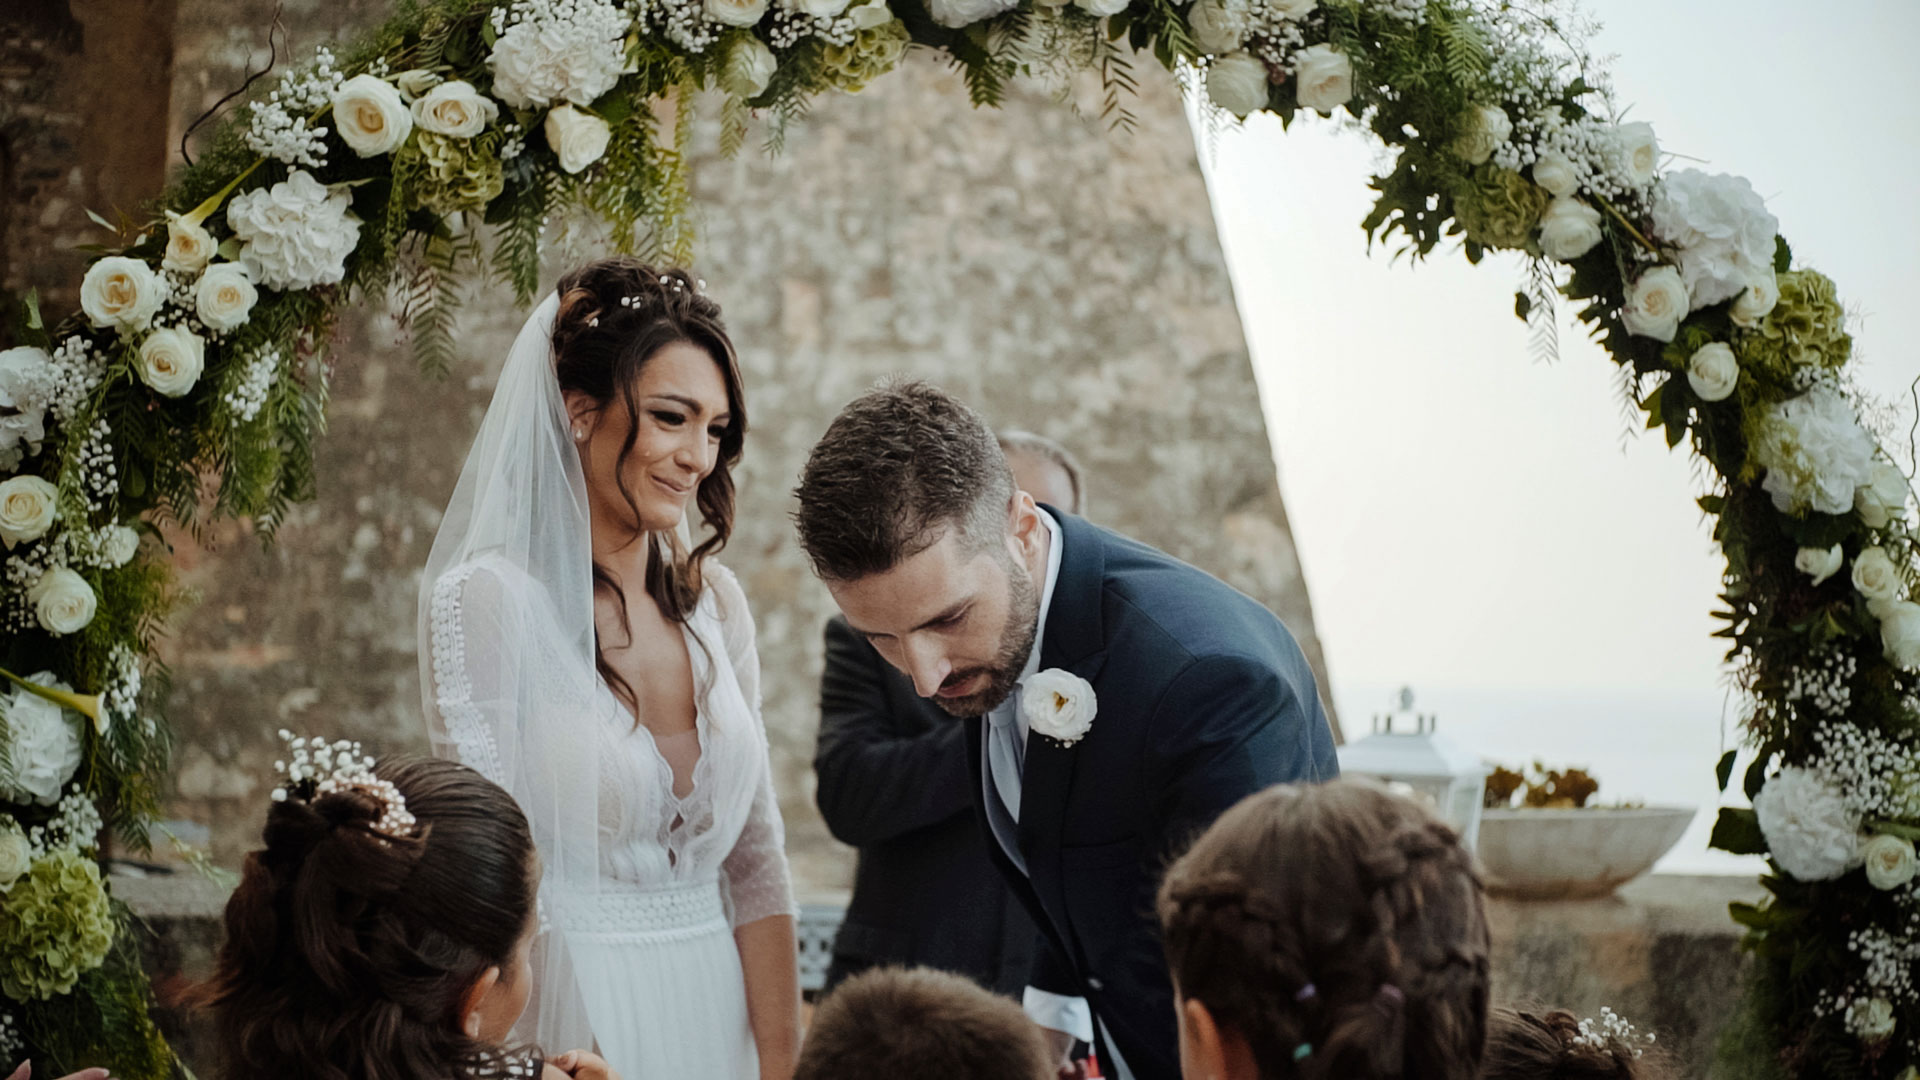 Destination Wedding in the South of Italy